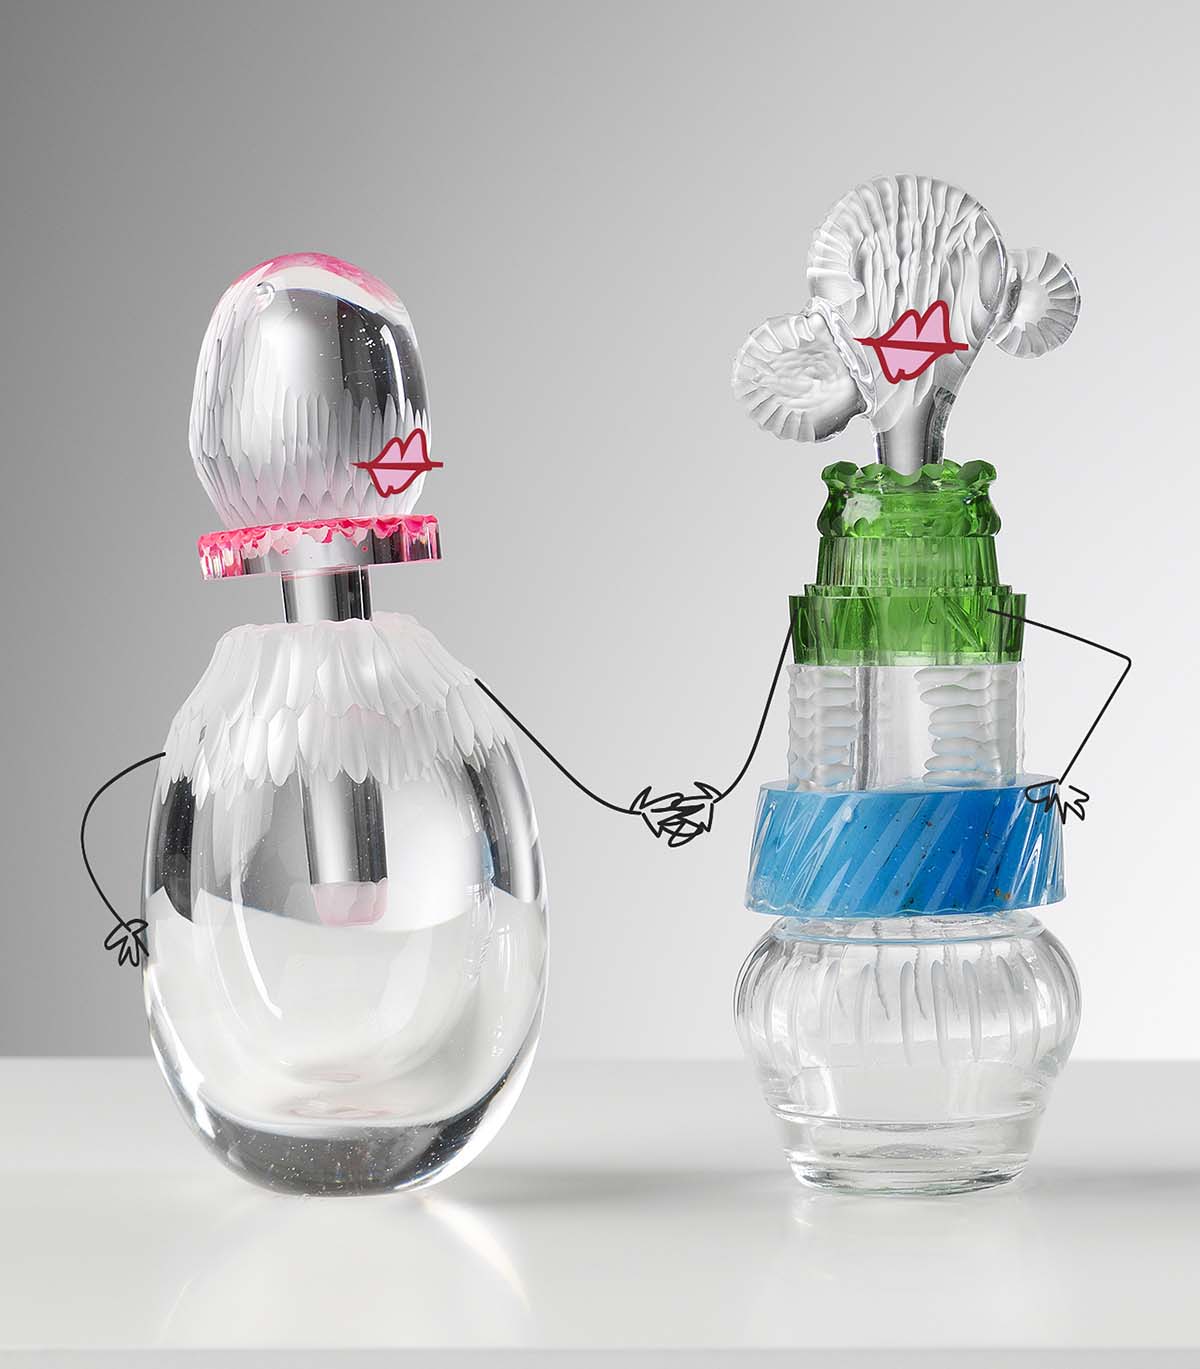 Two glass sculptures in the shape of women, with illustrated lips and arms, holding hands